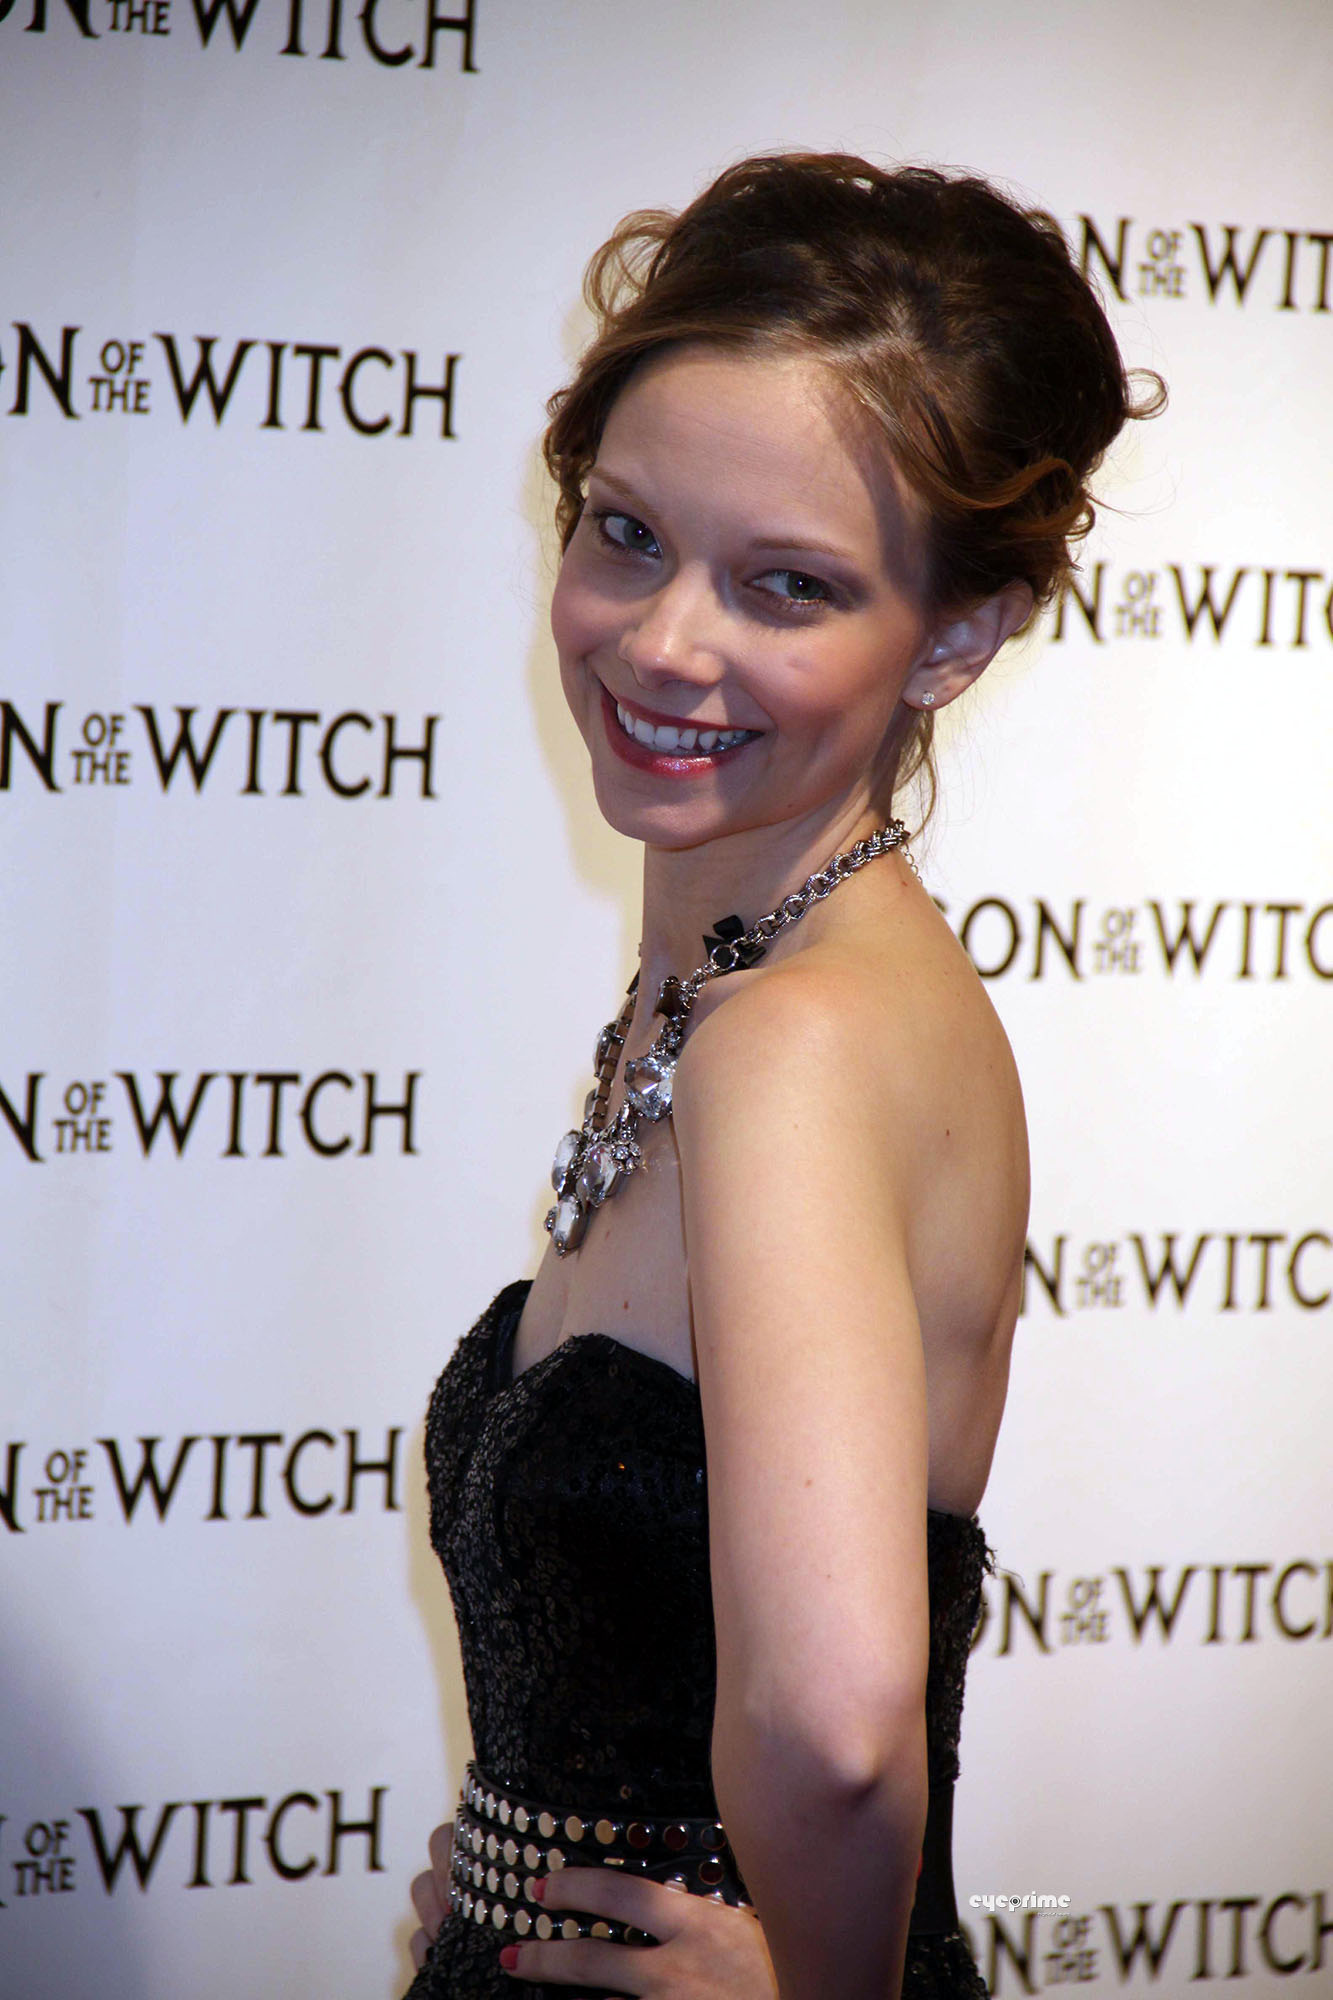 Rebekah at the Season of the Witch premiere in NYC January 4, 2011.